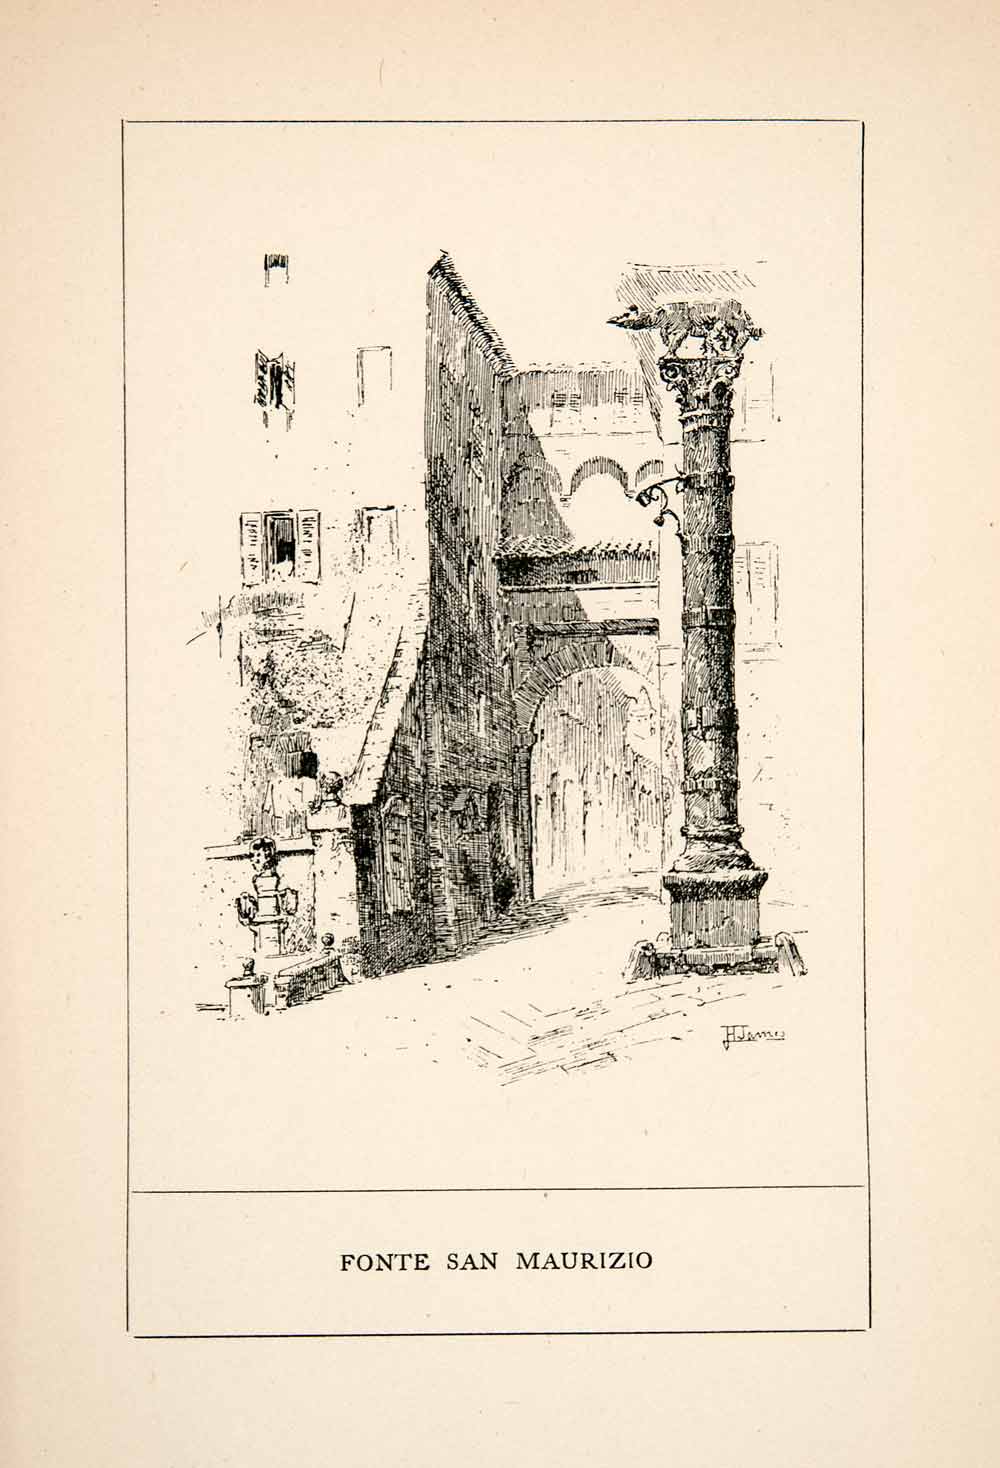 1902 Wood Engraving Fonte San Maurizio Italy Archway Street Architecture XGEB6